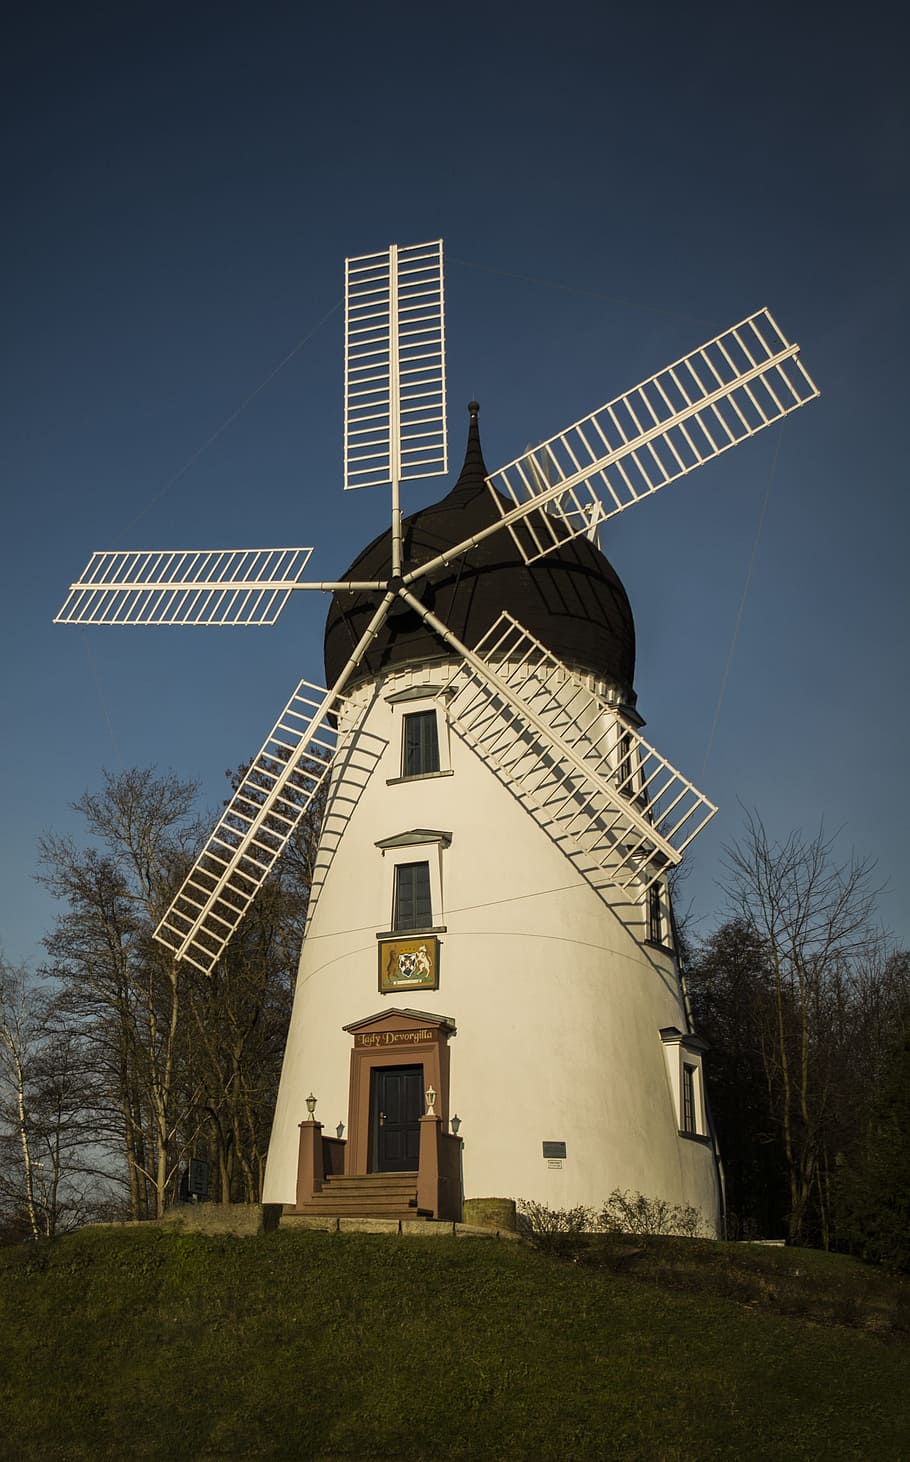 mill, gifhorn, windmill, sky, grass, trees, renewable energy, alternative energy, fuel and power generation, environmental conservation